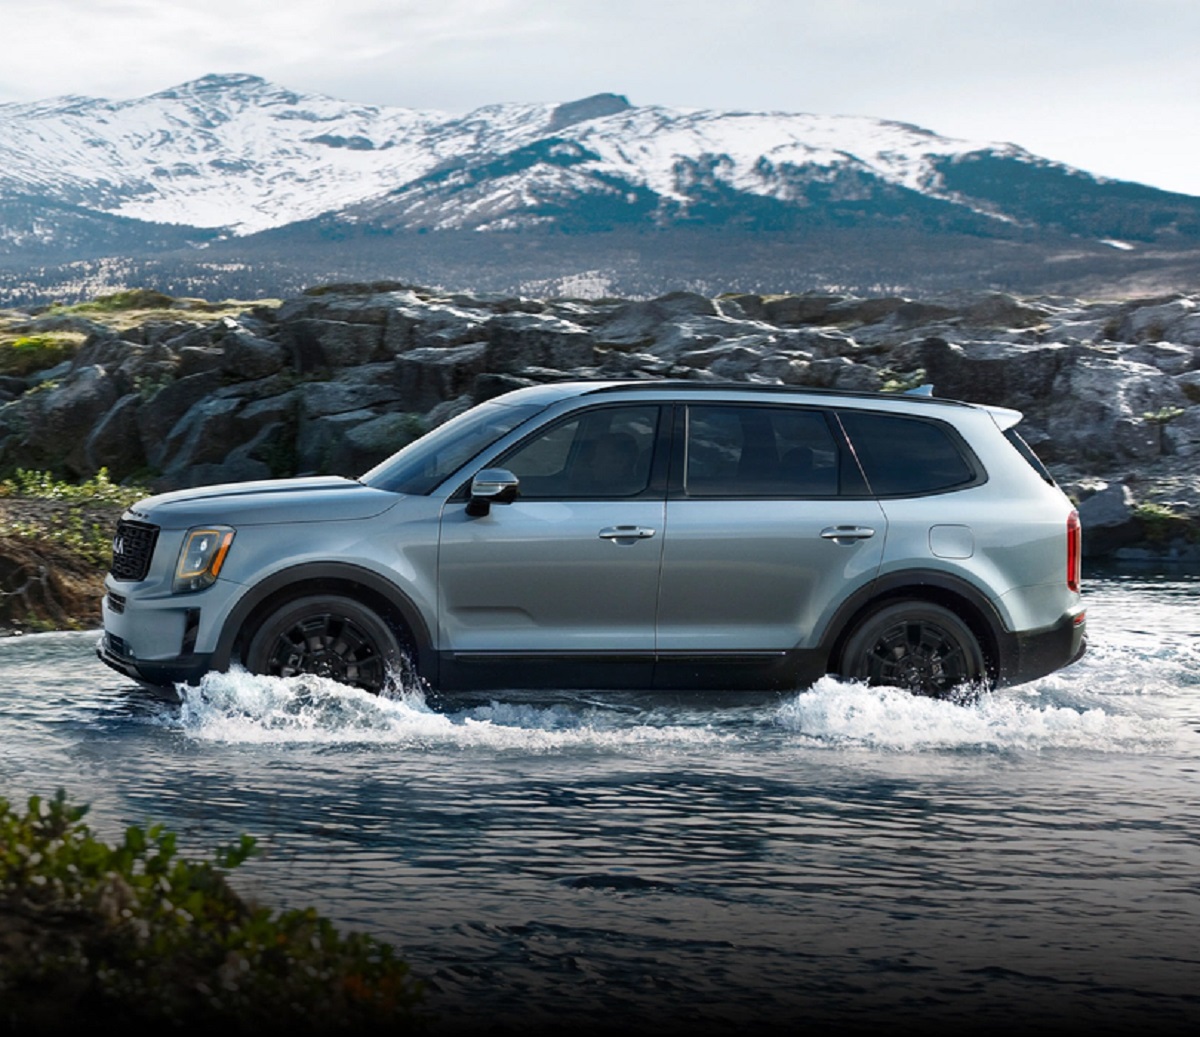 A silver 2021 Kia Telluride splashing through a river with a mountain in the background.